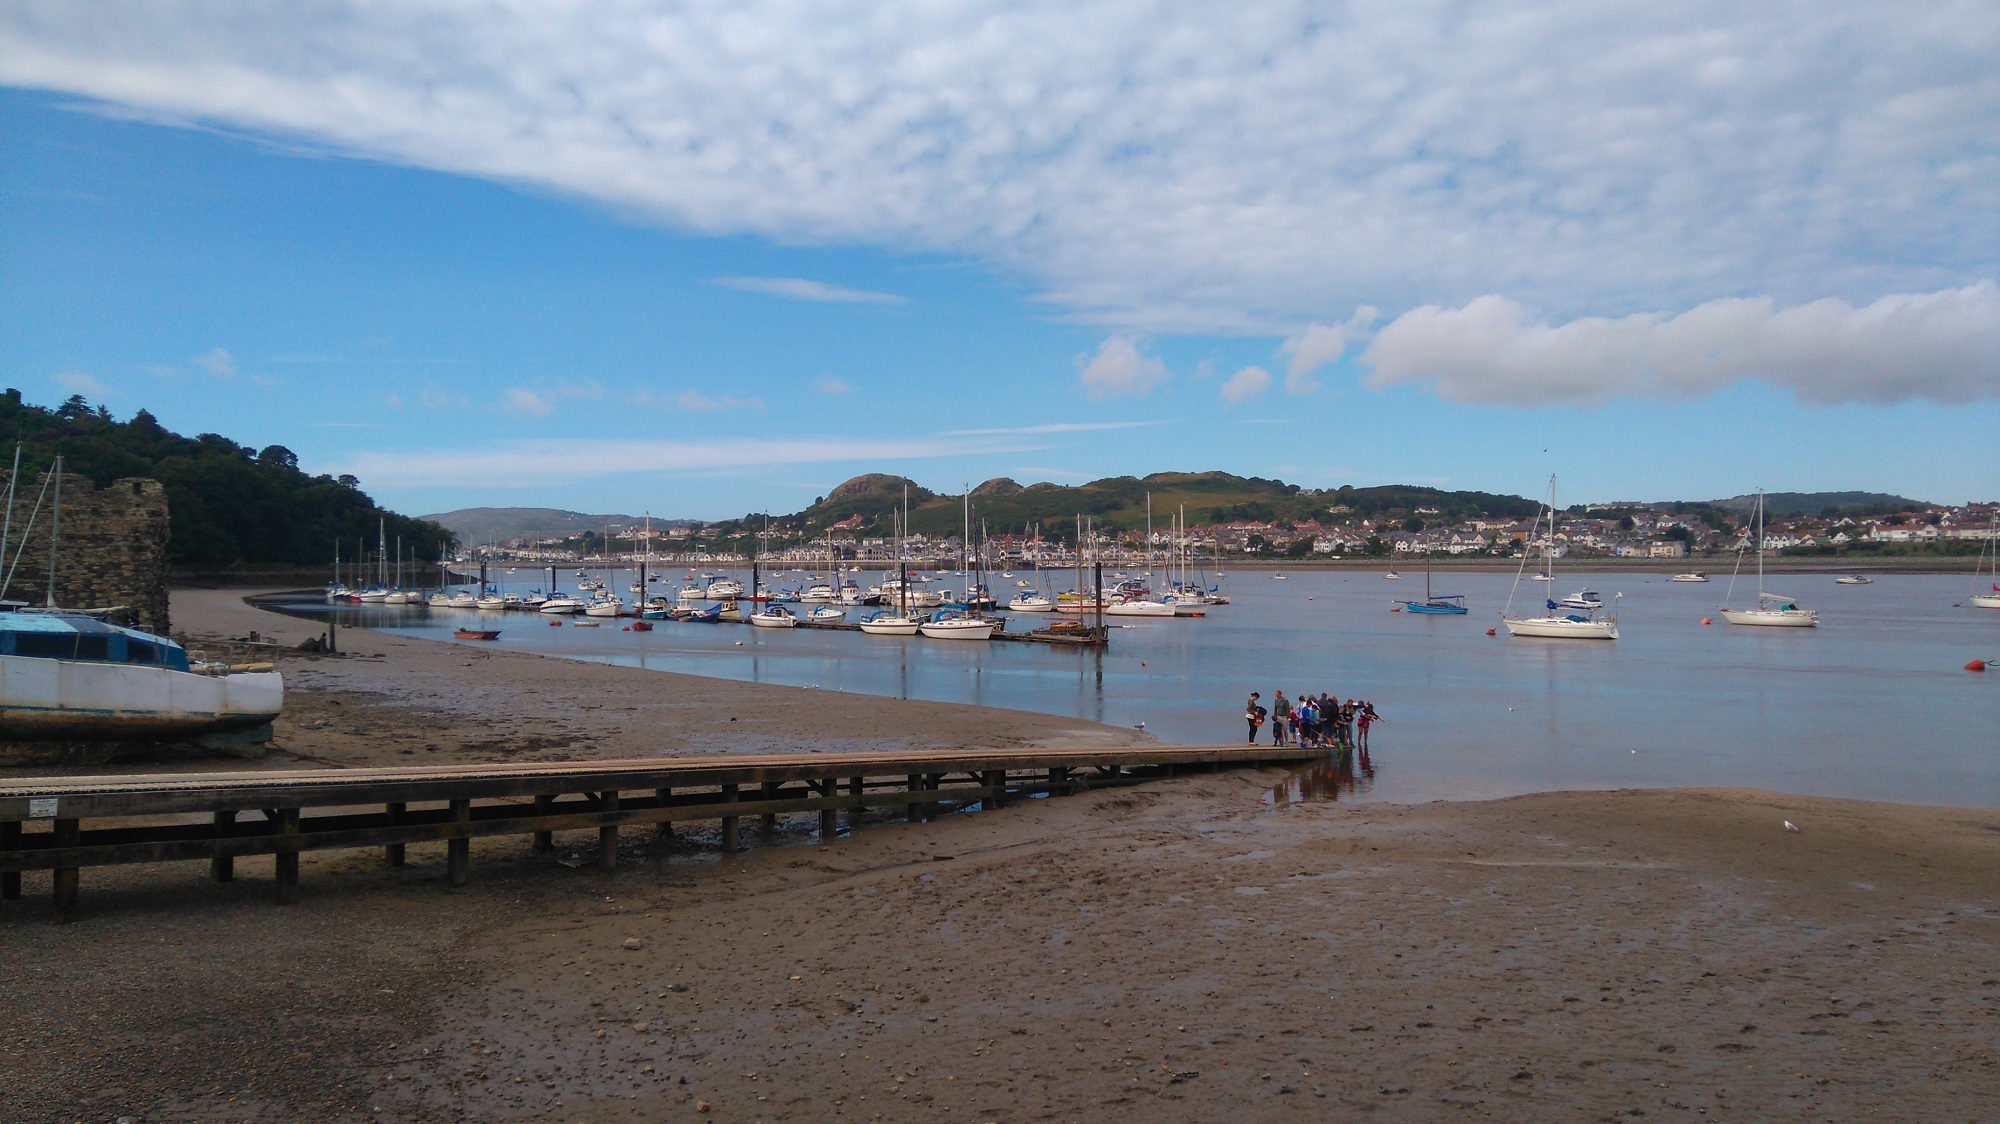 A jetty leads down into the River Conwy where boats are moored to buoys on a summer day. Deganwy is visible across the water.